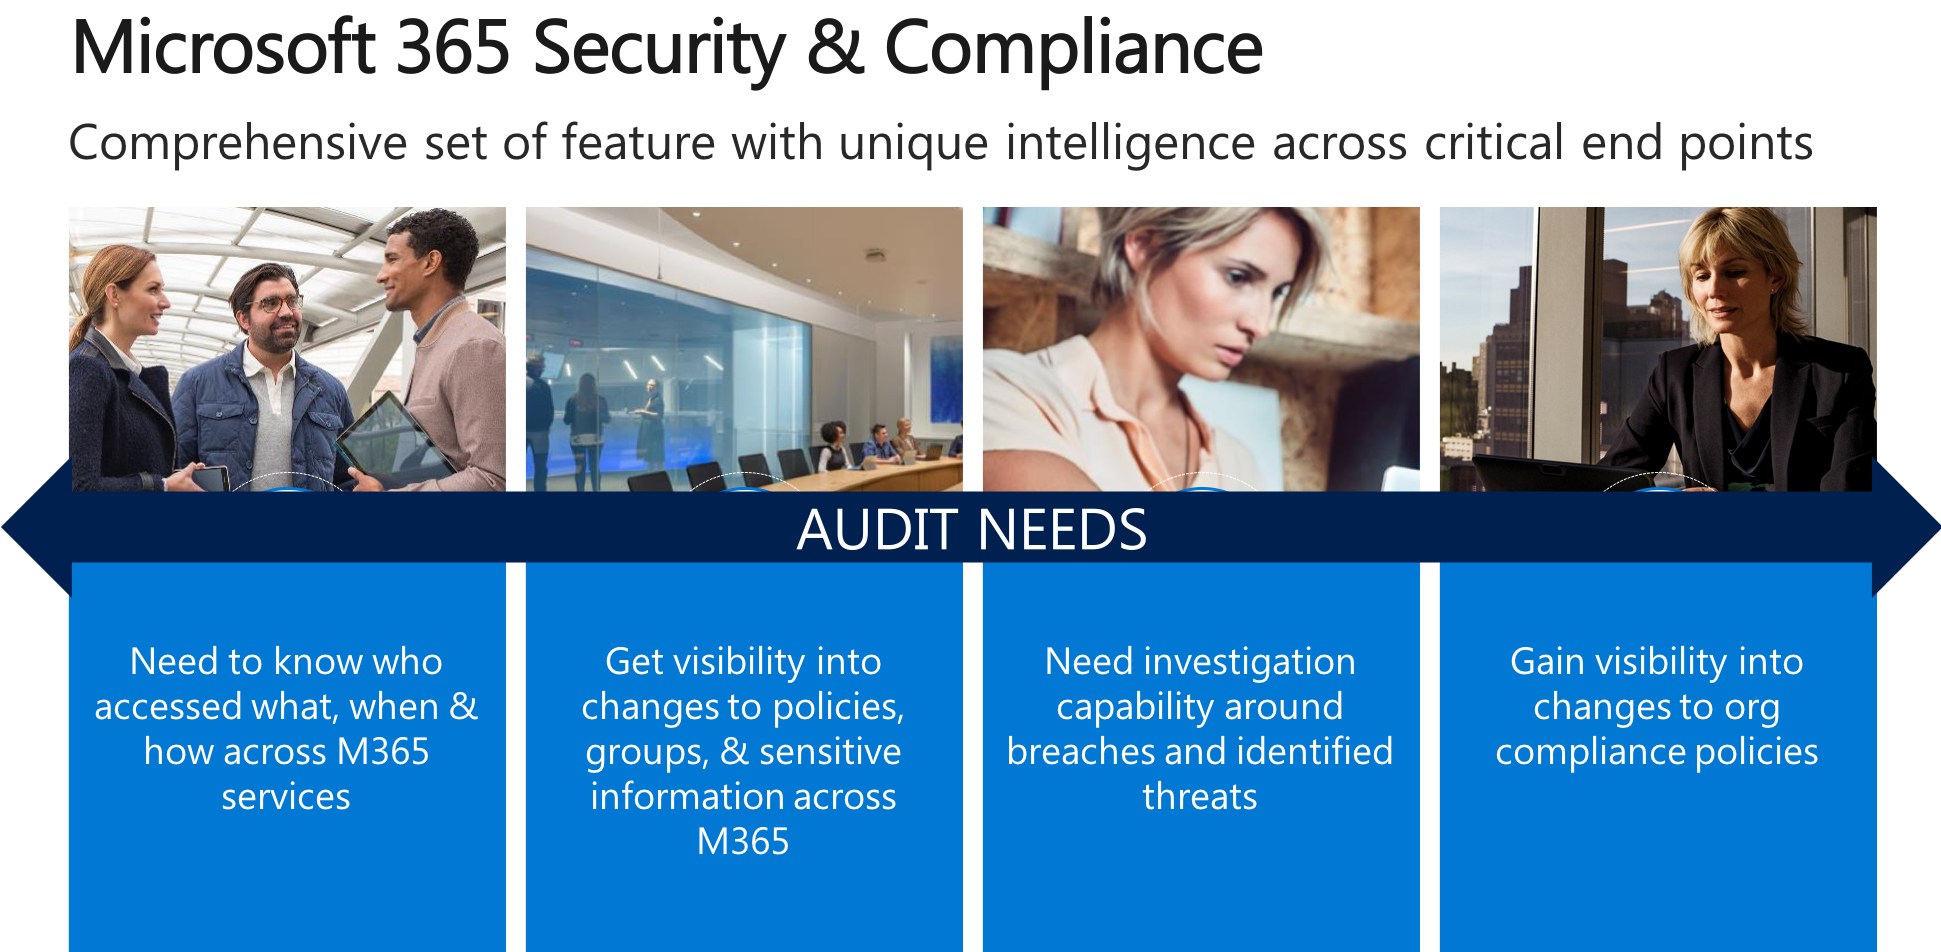 Meet 3.3 Audit and Accountability with Office 365